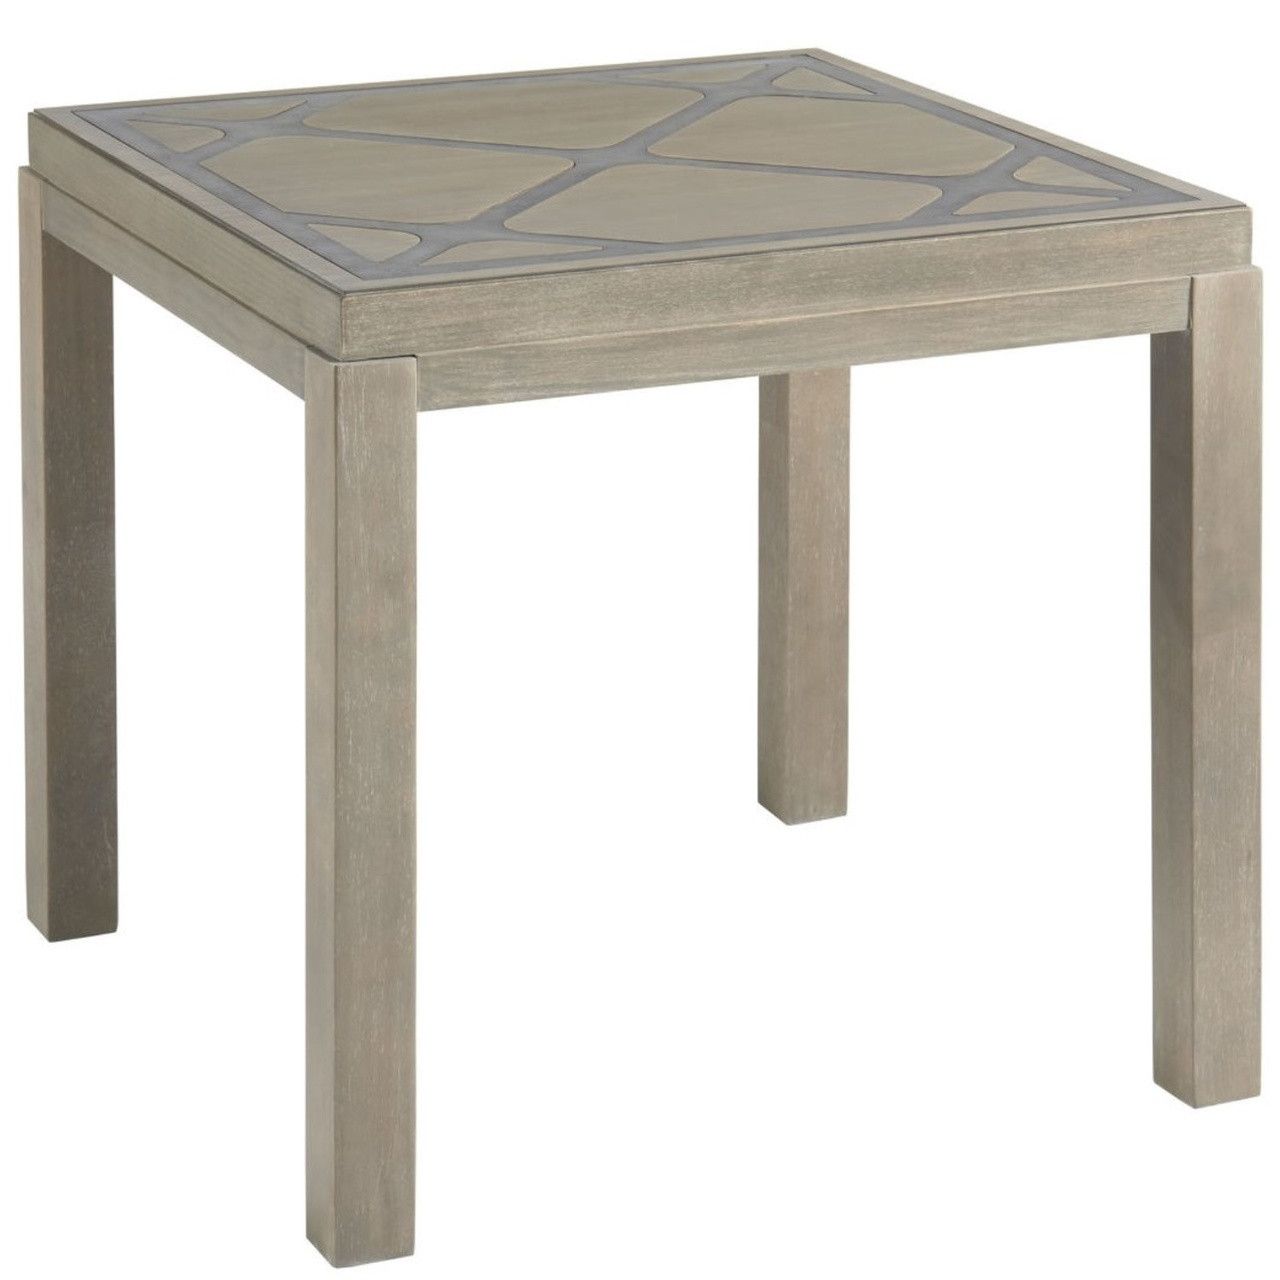 Griffin Rustic Grey Square End Table | Zin Home Inside Rustic Gray End Tables (Gallery 10 of 20)